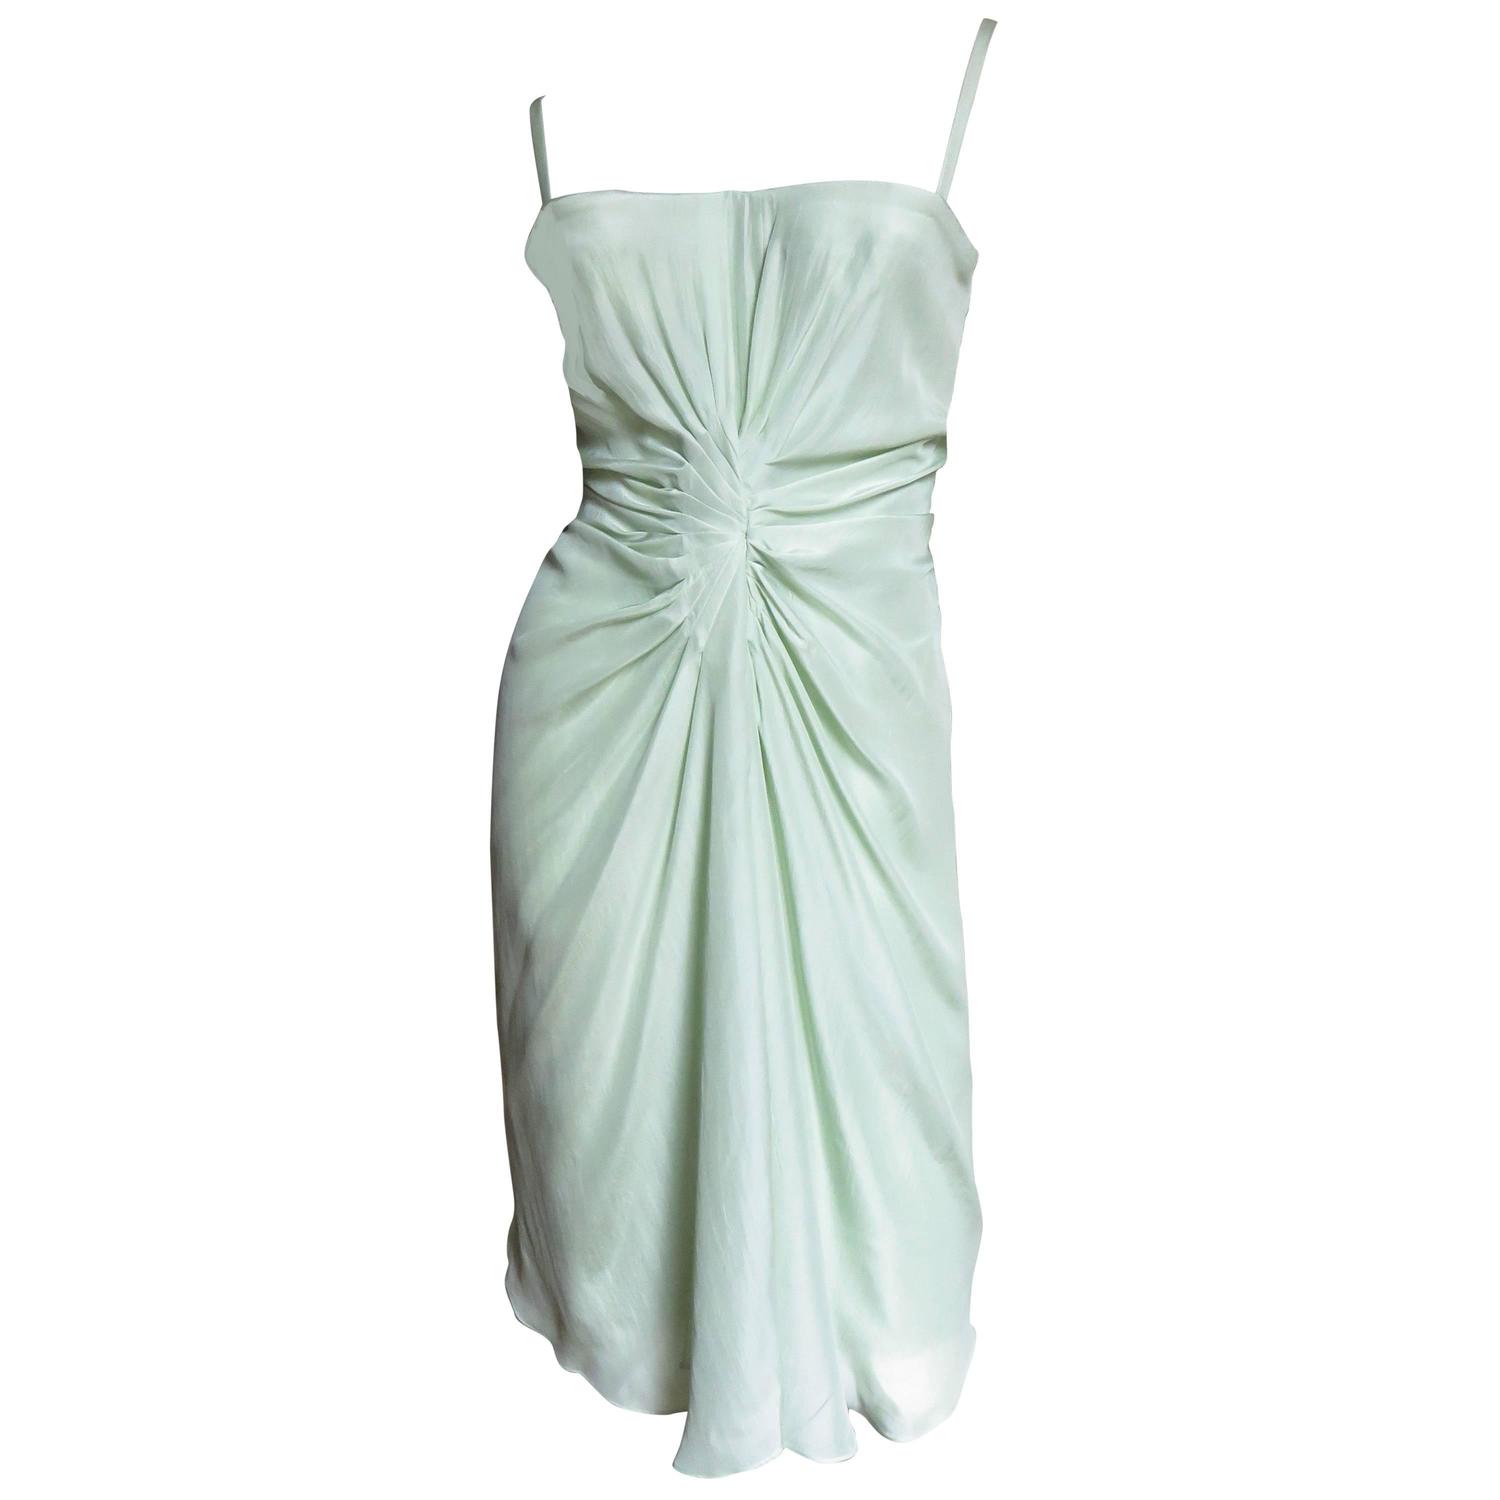 Christian Dior Ruched Bustier Corset Dress For Sale at 1stdibs